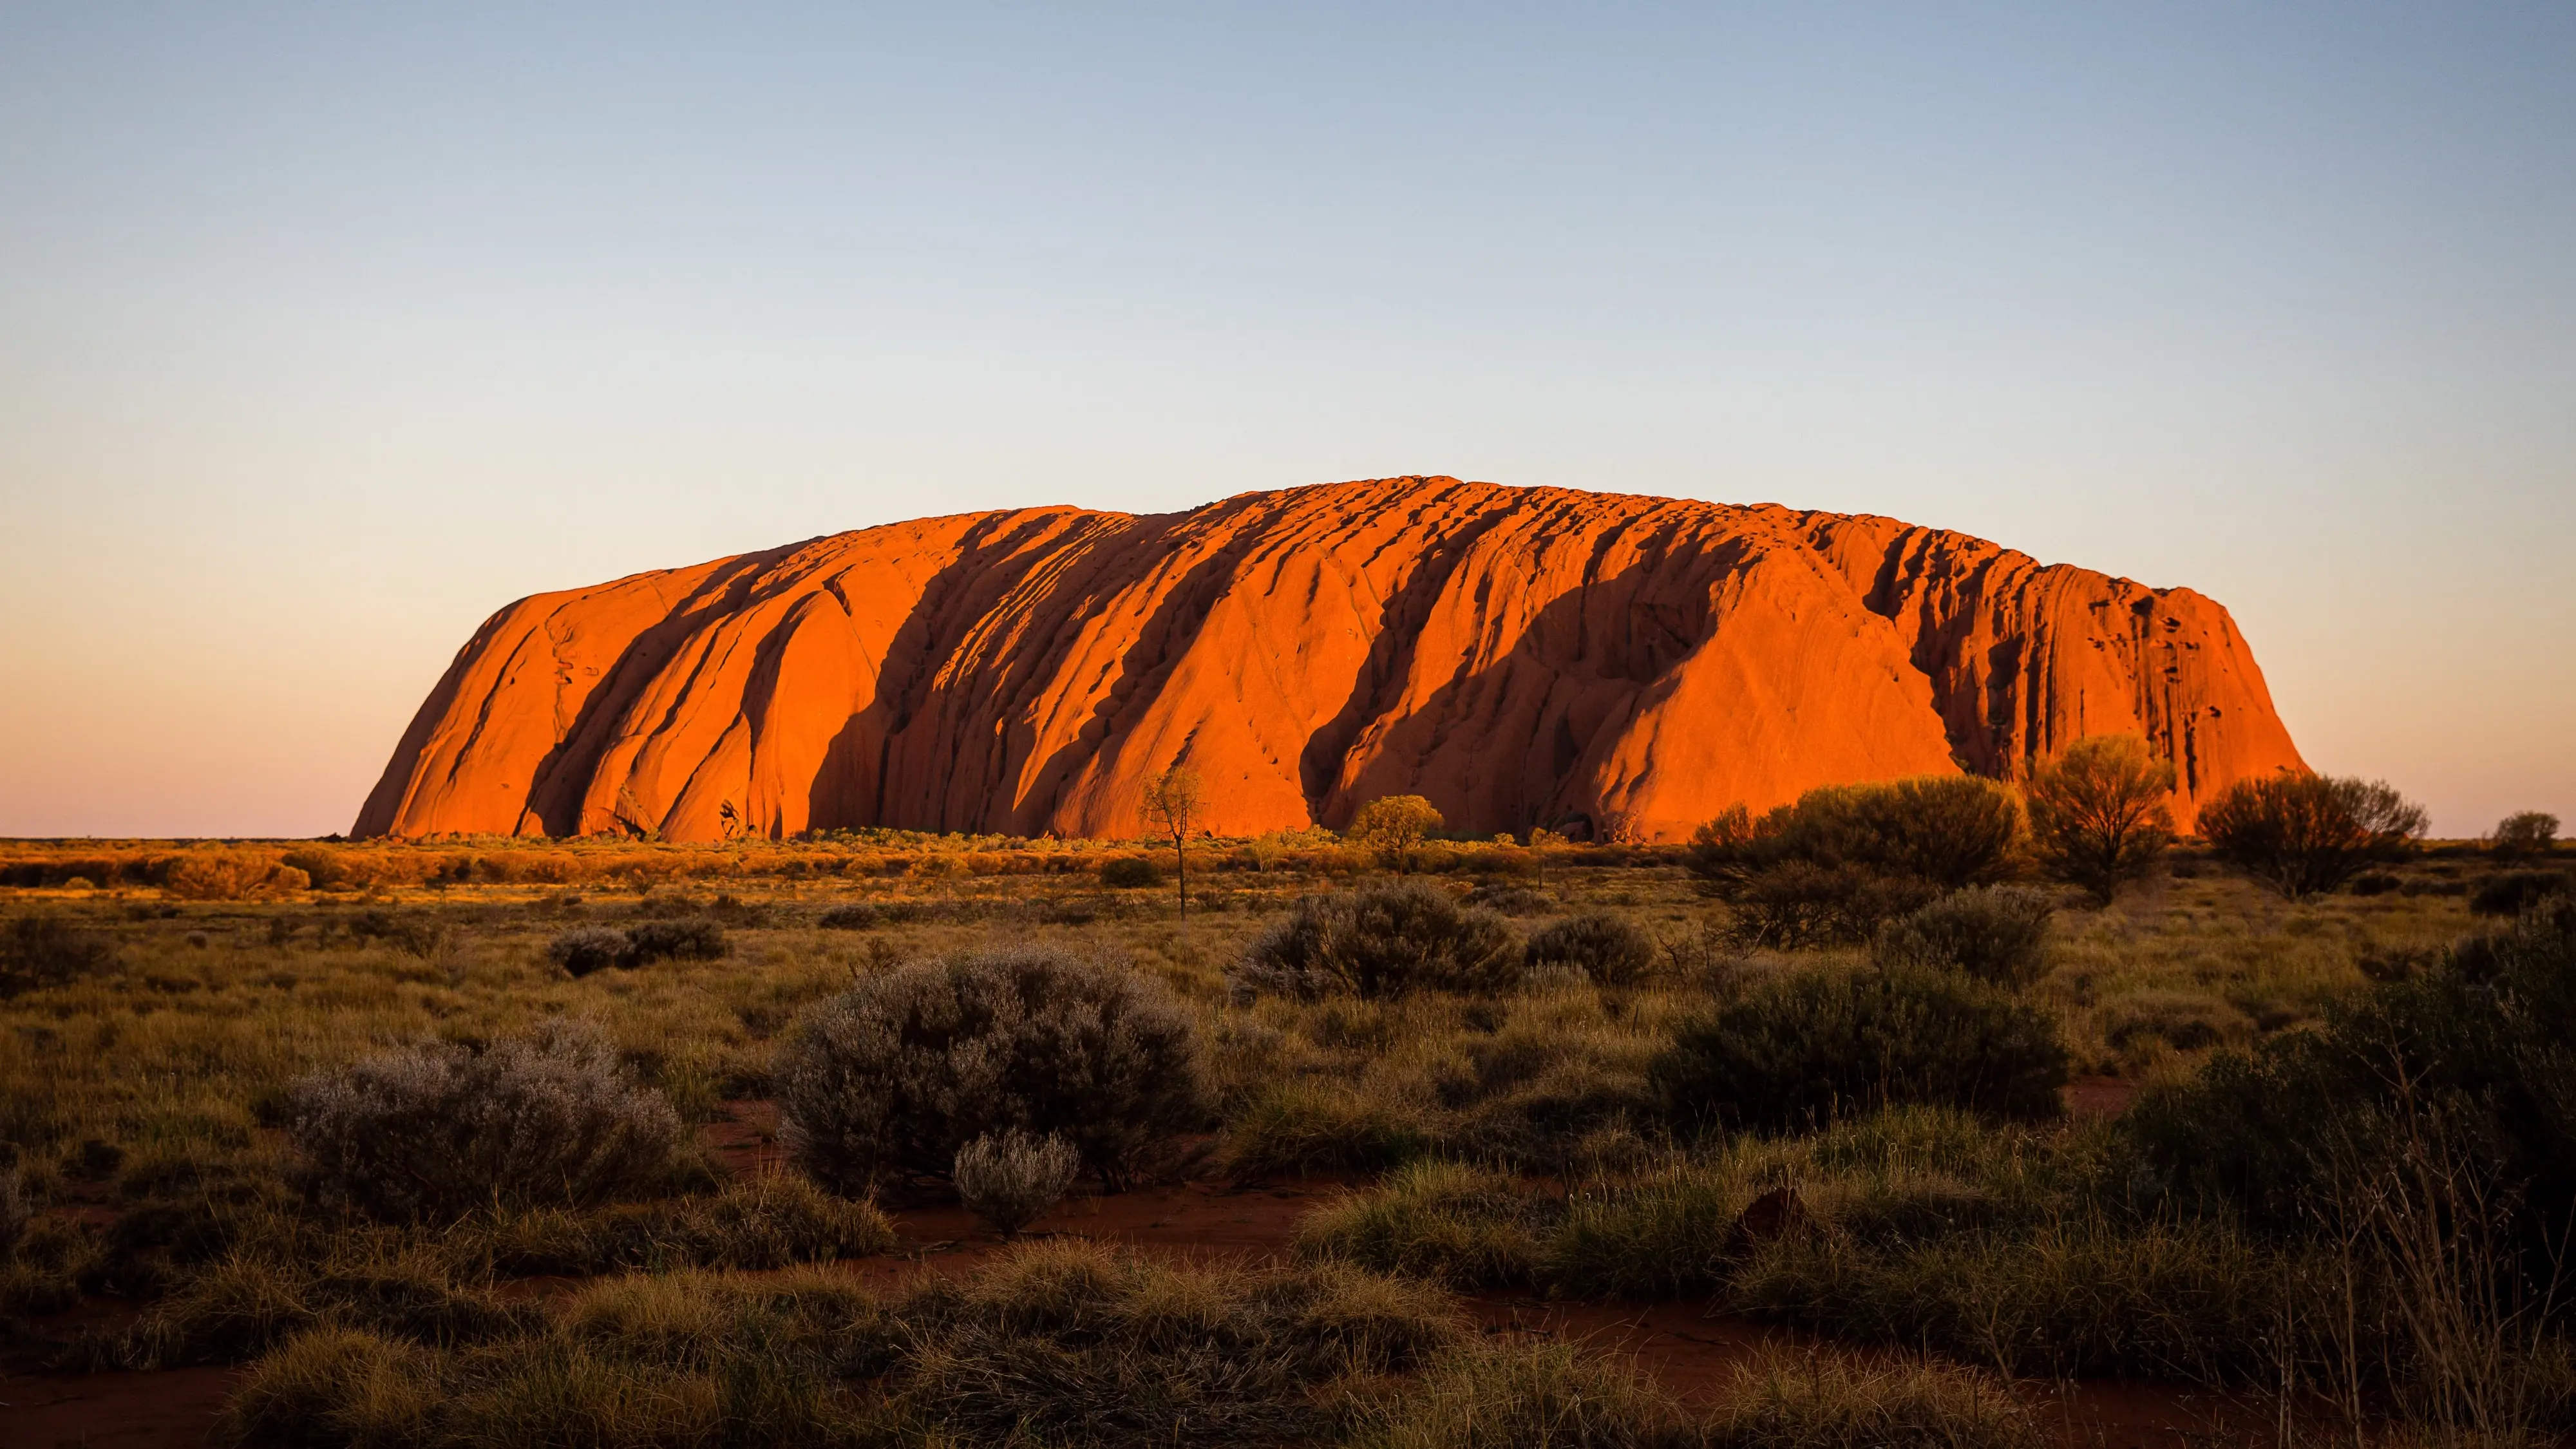 Red-orange Uluru with kangaroo grass and shrubs in the foreground. Image credit: Tourism NT/Kate Flowers